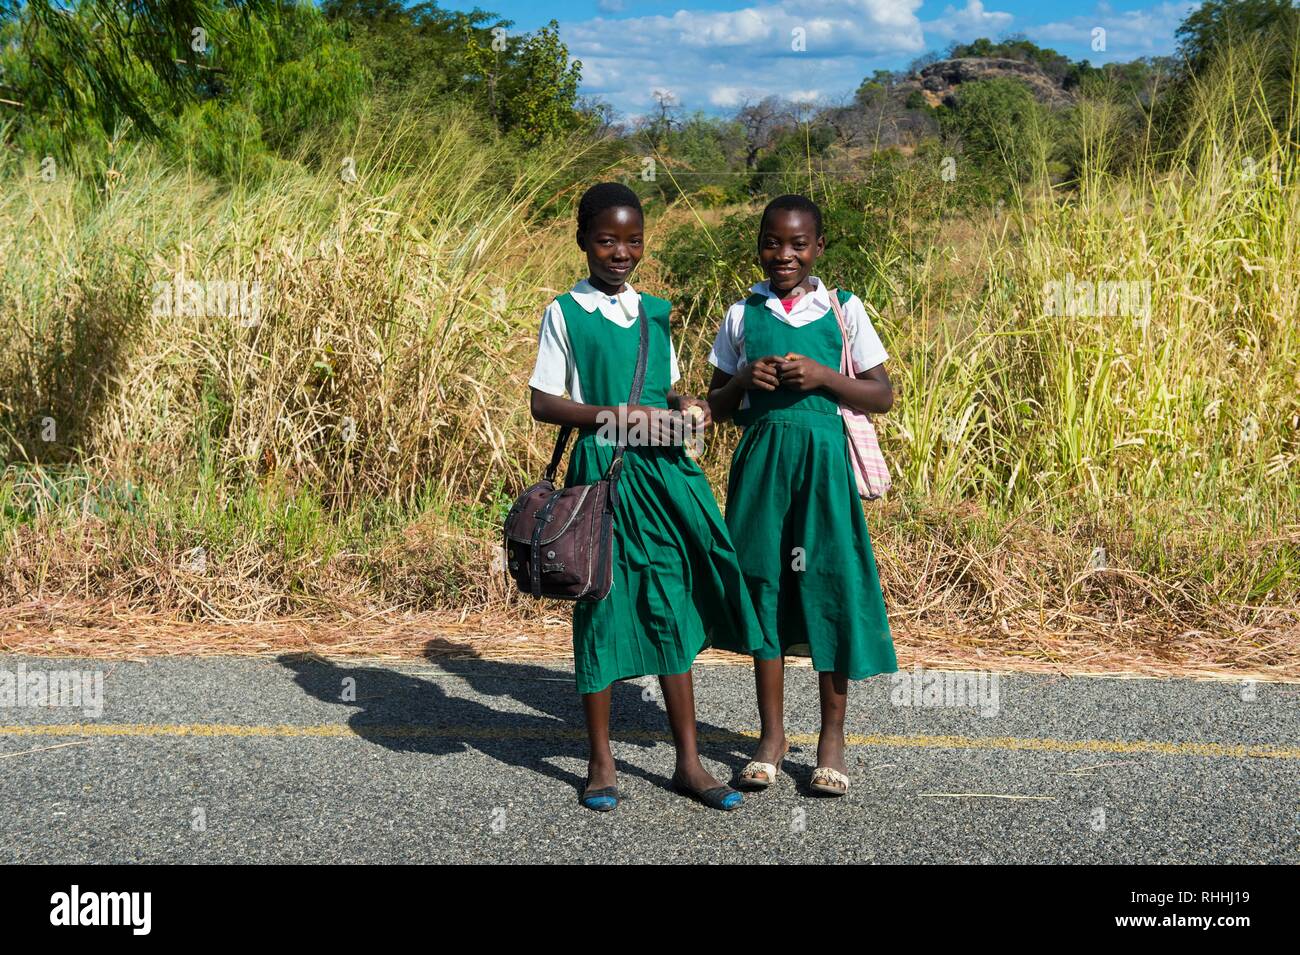 Young school girls on their way home, Cape Maclear, Malawi, Africa Stock Photo